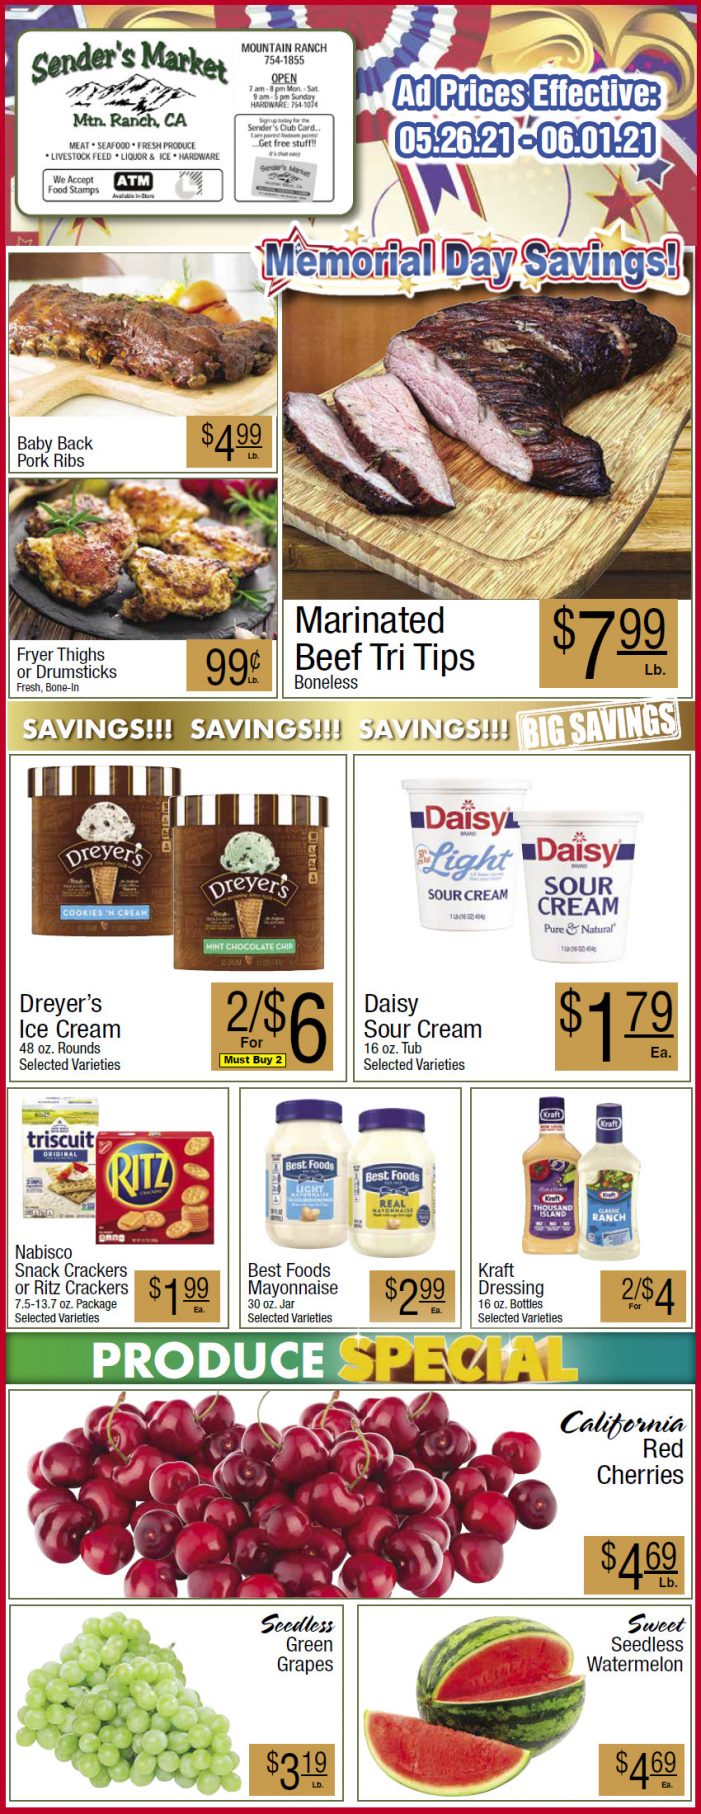 Sender’s Market’s Weekly Ad & Grocery Specials May 26th Through June 1st.  Shop Local & Save!